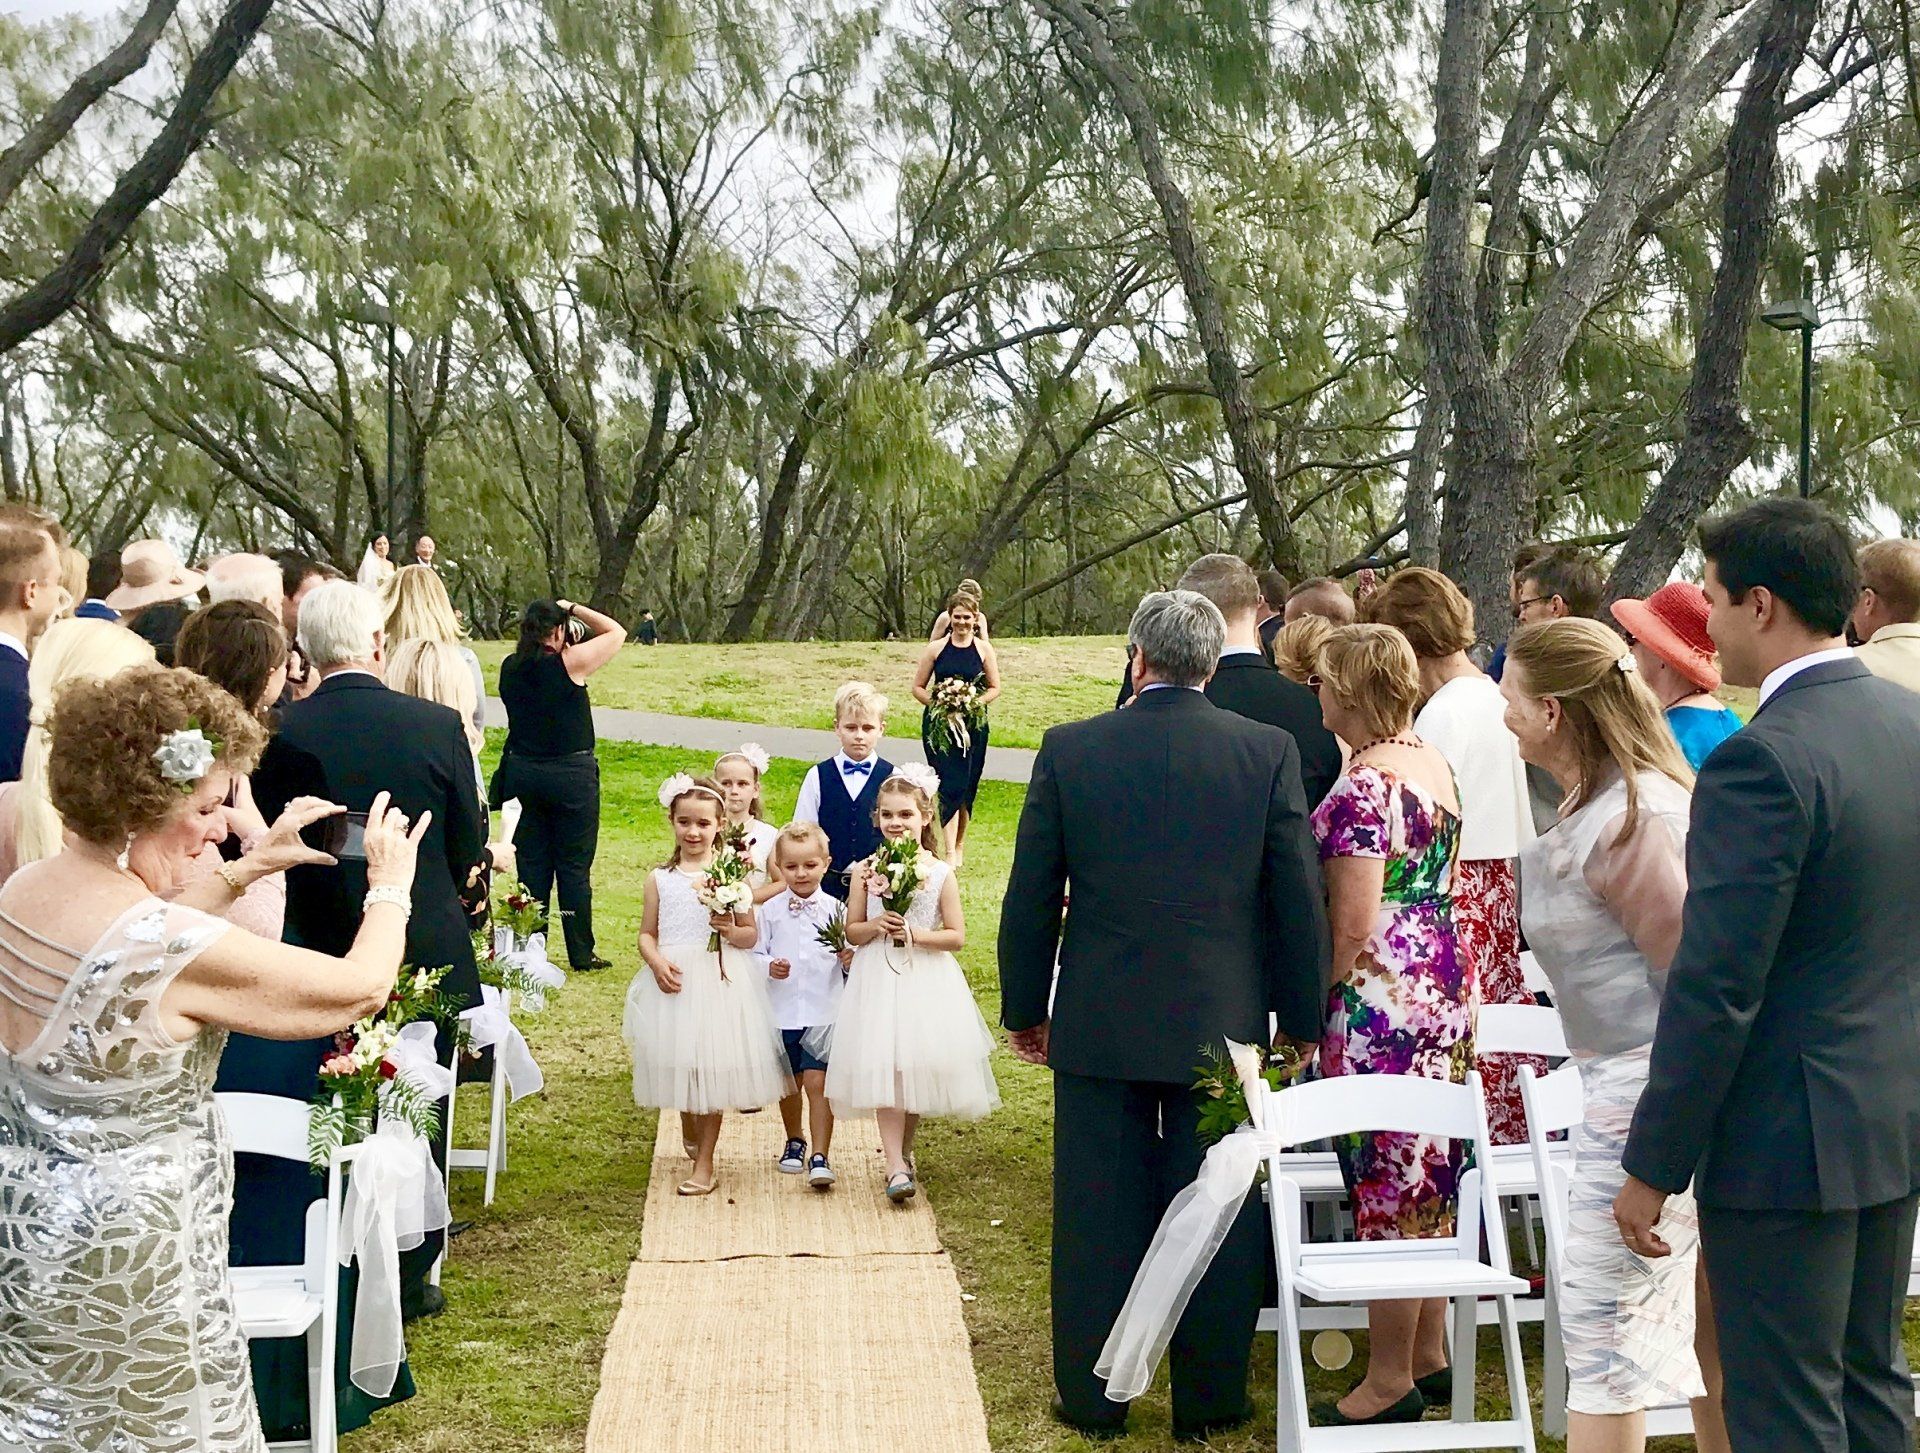 flower girls and page boys walk down the aisle first holding flowers befote the bridesmaids and then bride at a Mooloolaba wedding by the ocean